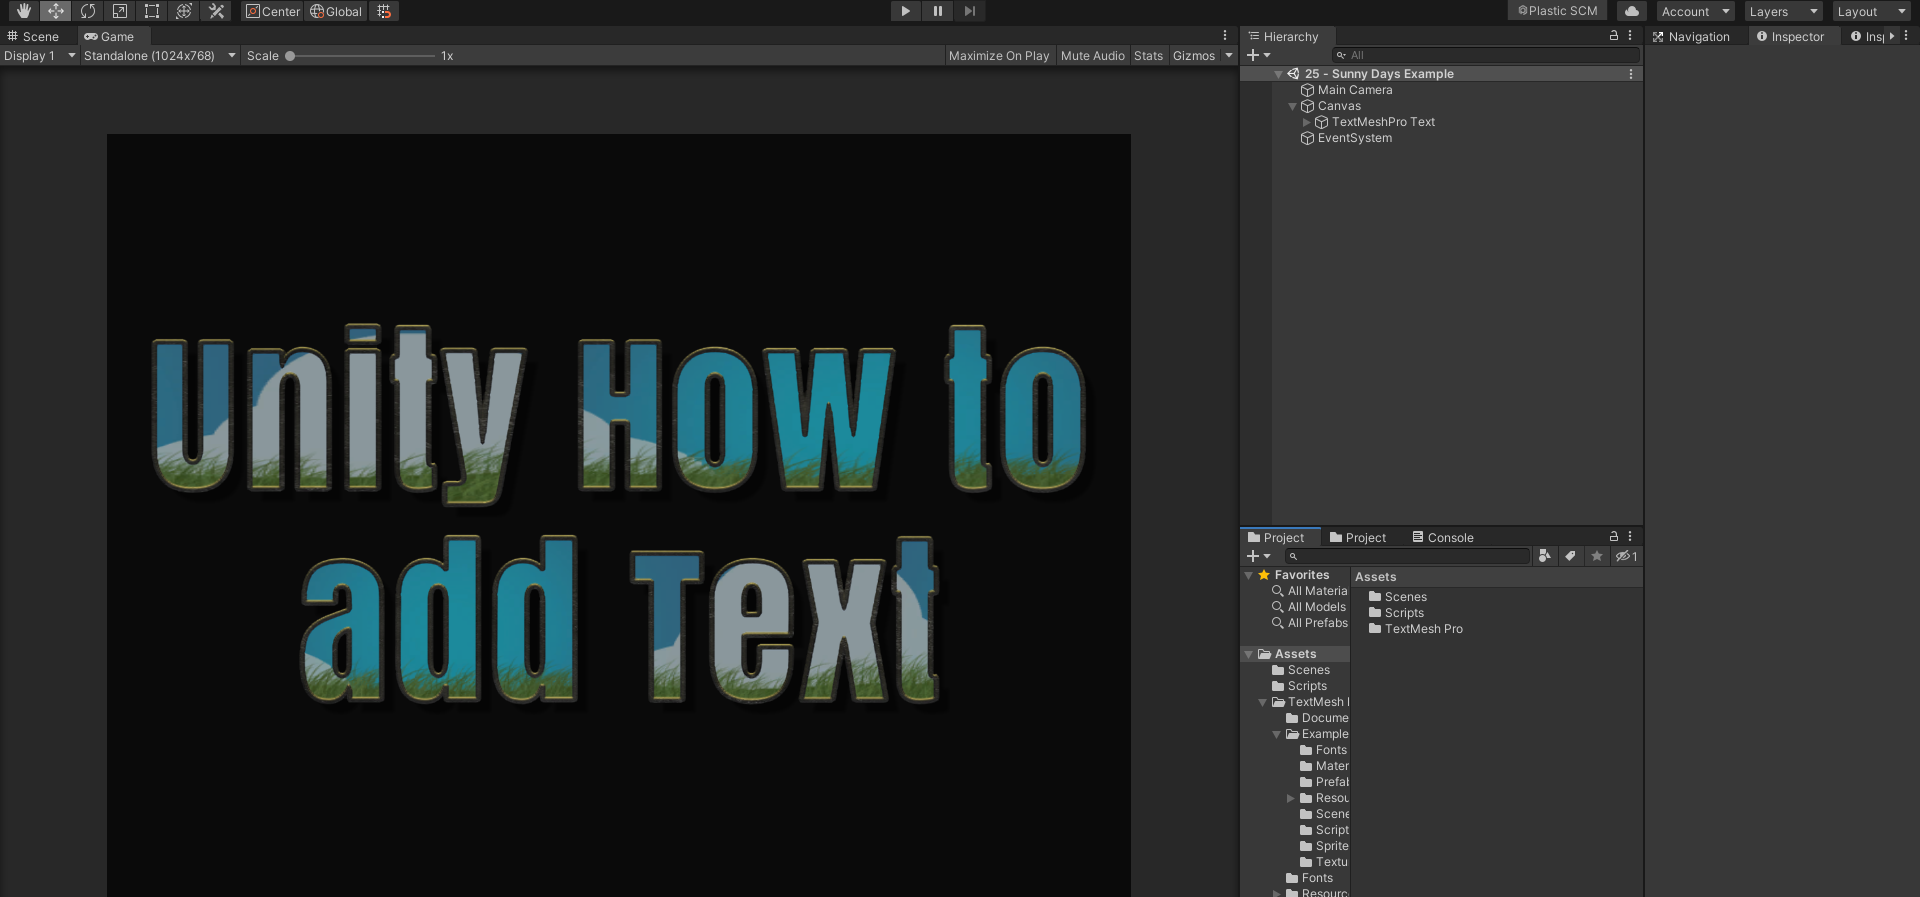 Unity how to add text